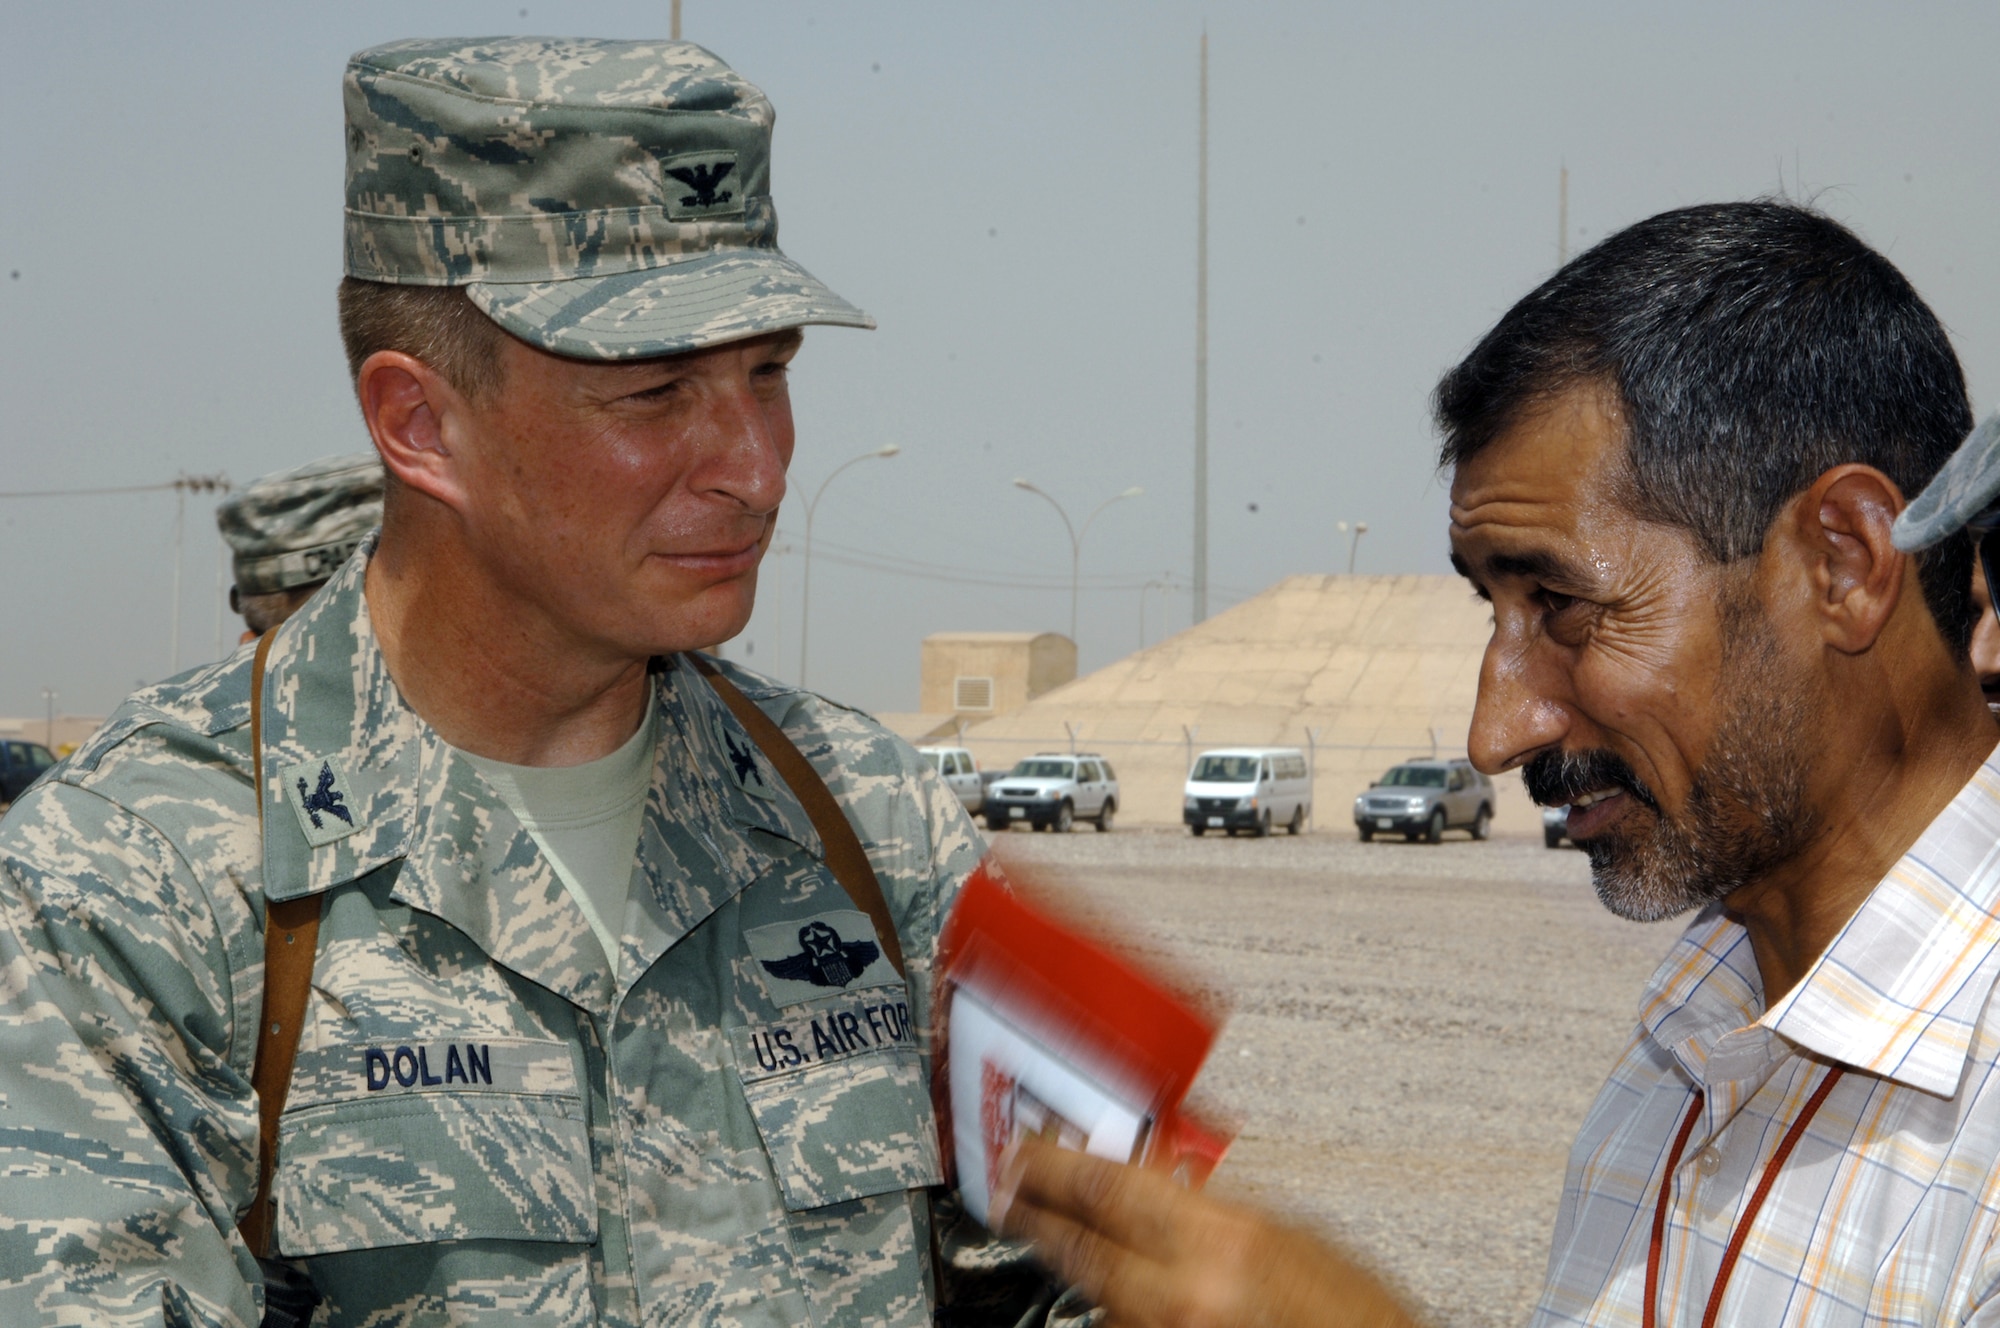 Col. John Dolan speaks with Hashim Abd Al-Amir Mahdi of the Miran Co. after a ribbon-cutting ceremony to mark the opening of an Iraqi-based Industrial Zone Aug. 21 at Joint Base Balad, Iraq. The Miran Co. is establishing an I-BIZ business on base that will create approximately 70 jobs for Iraqis within six months. Colonel Dolan is the 332nd Air Expeditionary Wing vice commander. (U.S. Air Force photo/Tech. Sgt. Erik Gudmundson) 
